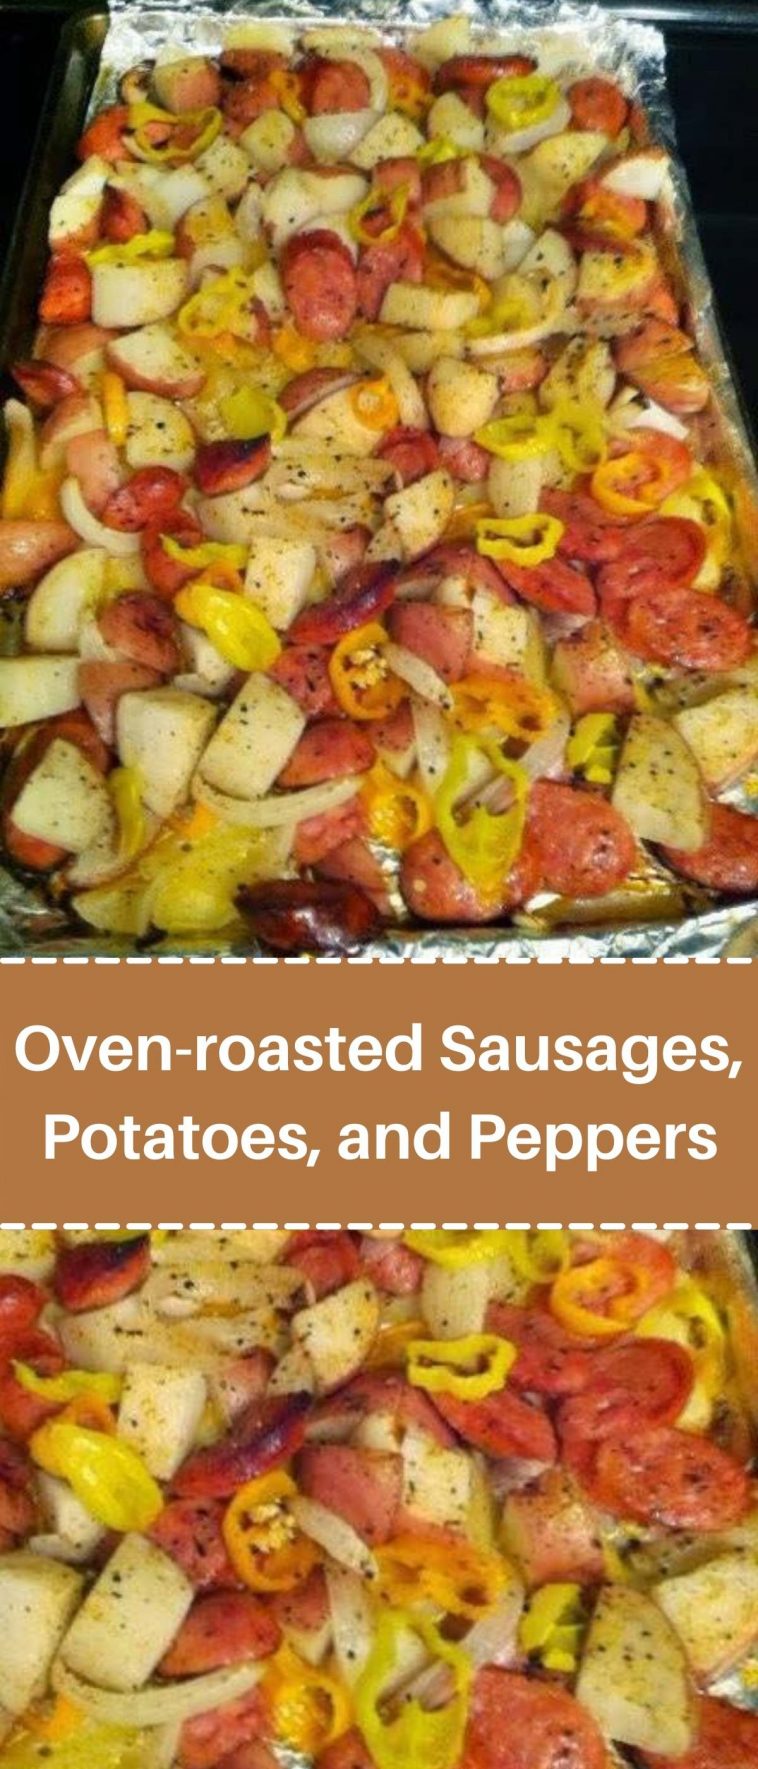 Oven-roasted Sausages, Potatoes, and Peppers